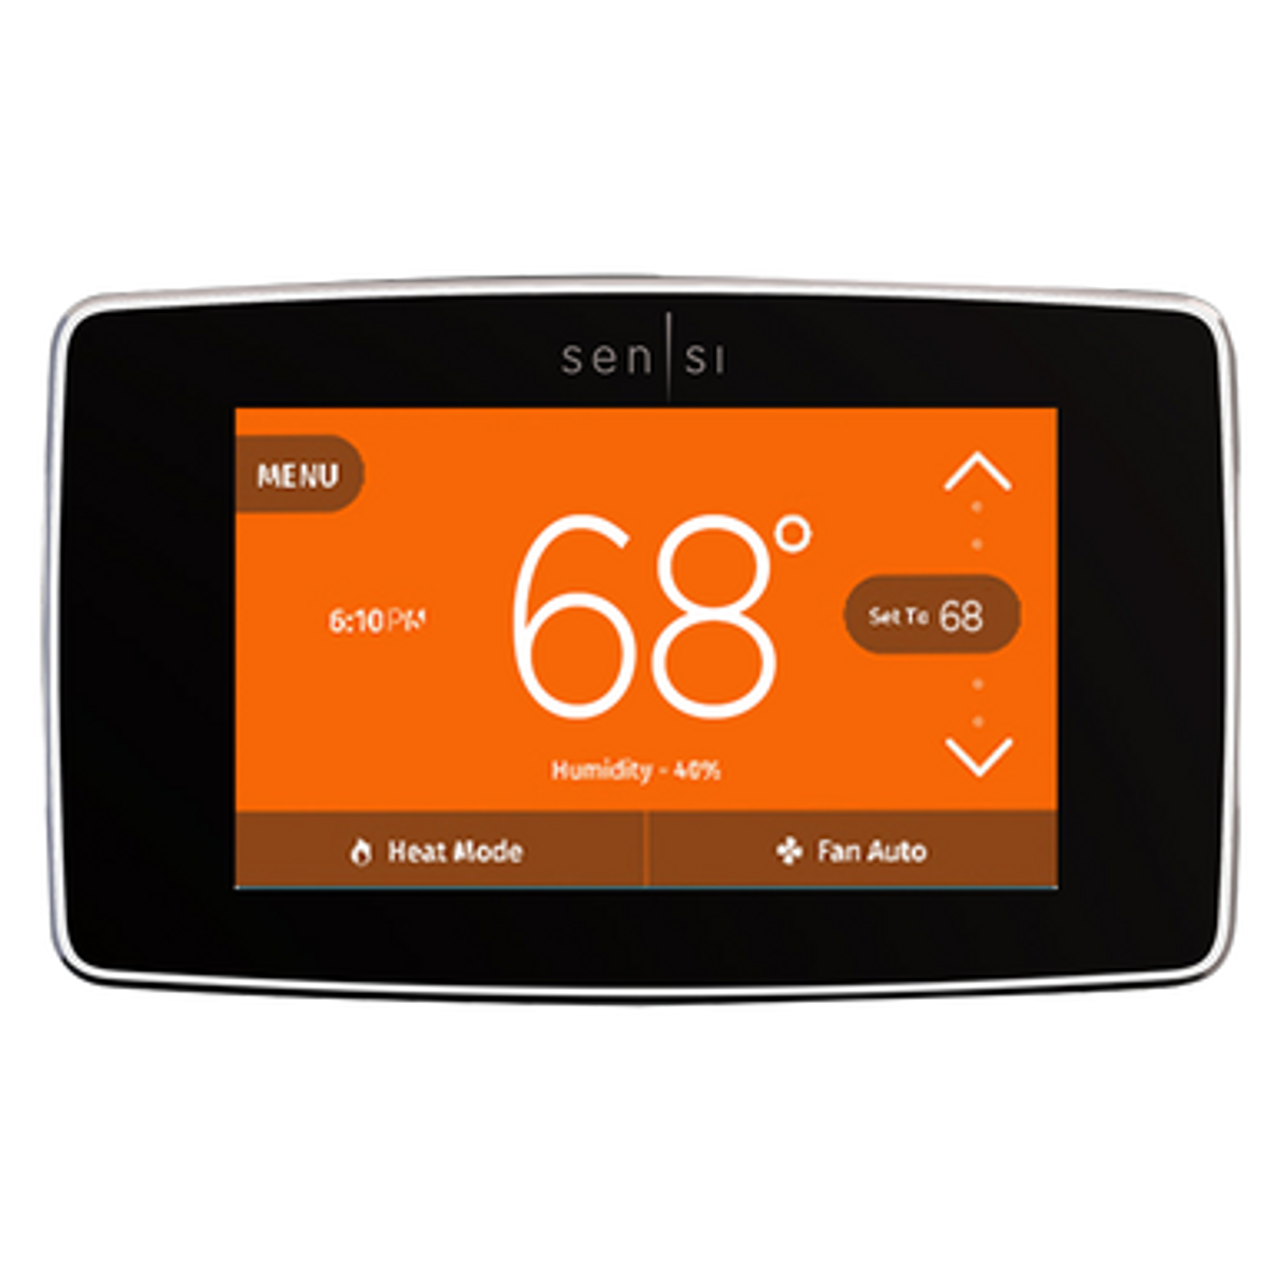 Sensi Touch Smart Thermostat set to 68 Heating